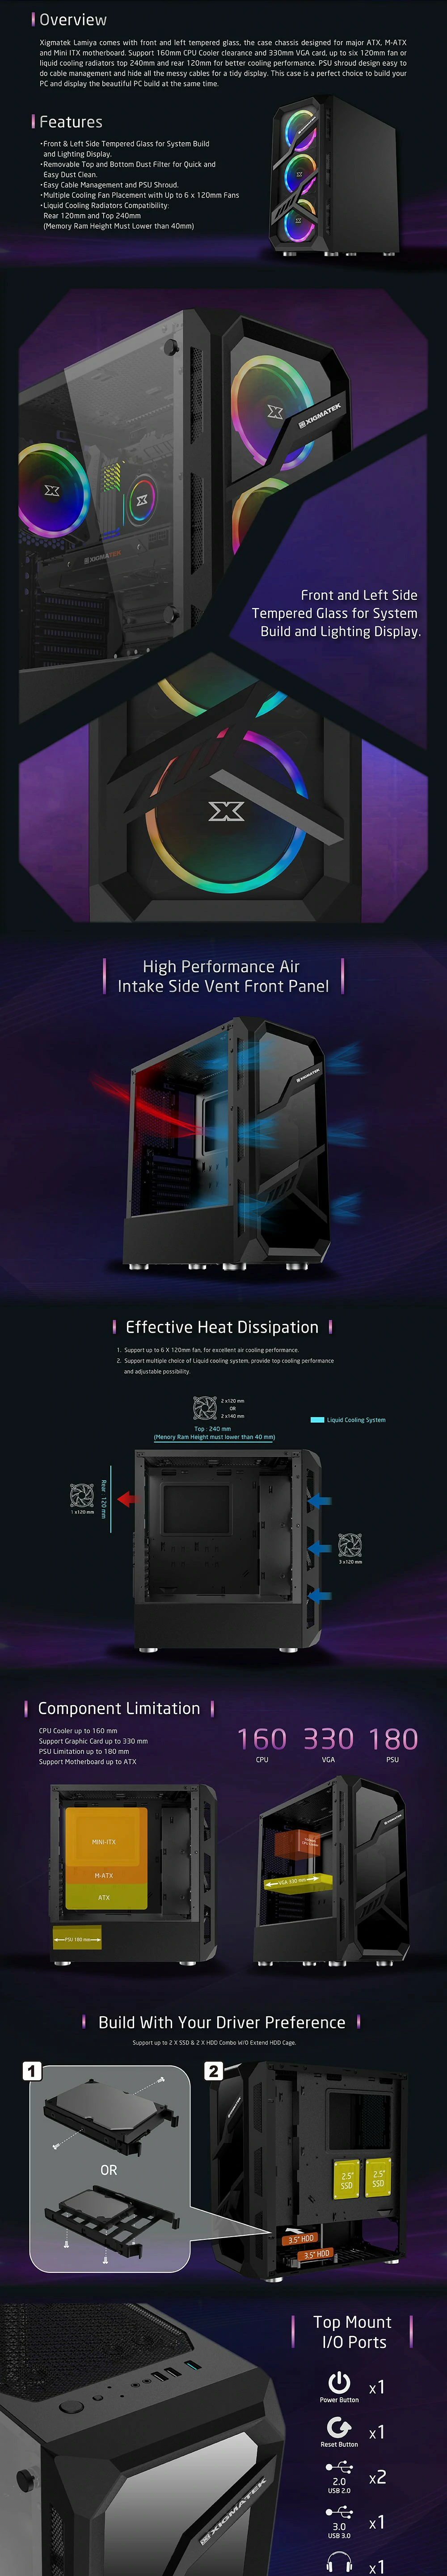 Overview - Specifications - Xigmatek - Lamiya - Tempered Glass ARGB Mid Tower Chassis